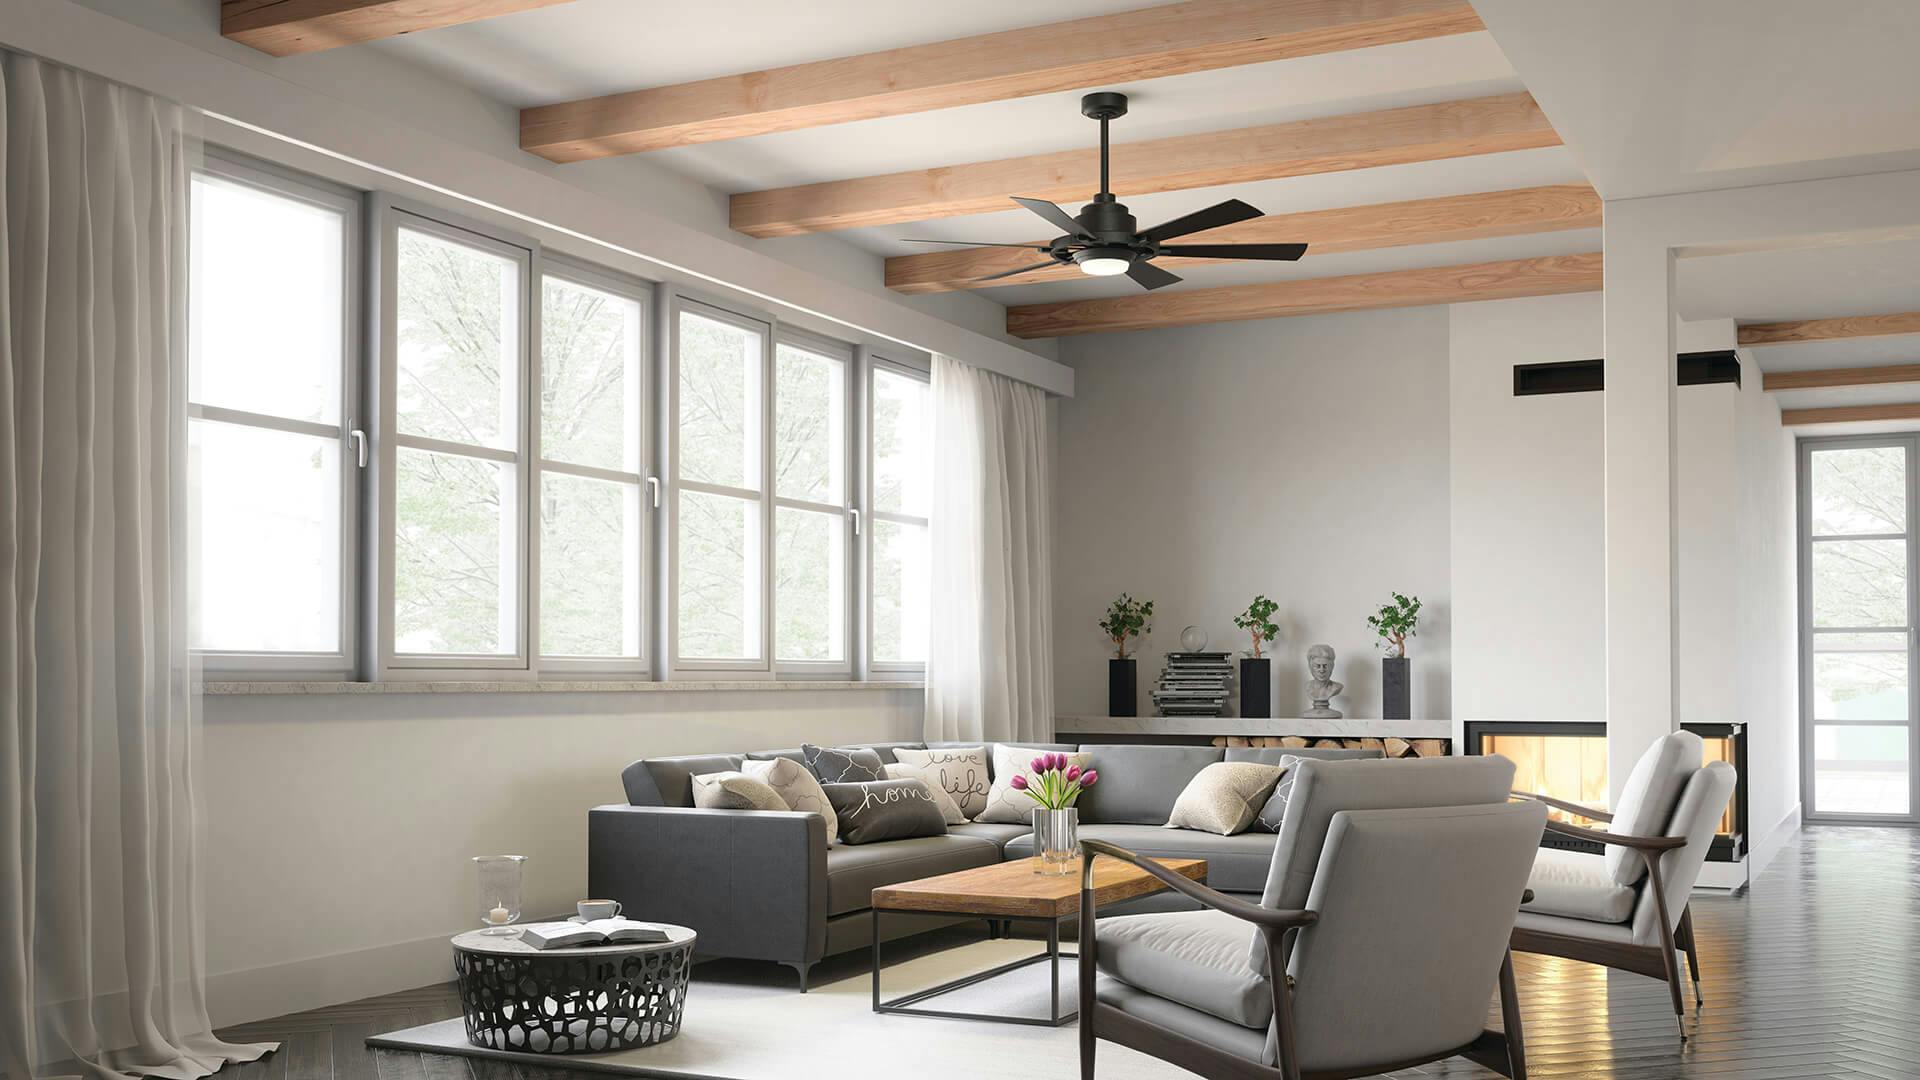 Daytime in a gray living room featuring a flat, vaulted ceiling with wooden beams while a black Iras ceiling fan hangs above a couch and set of chairs